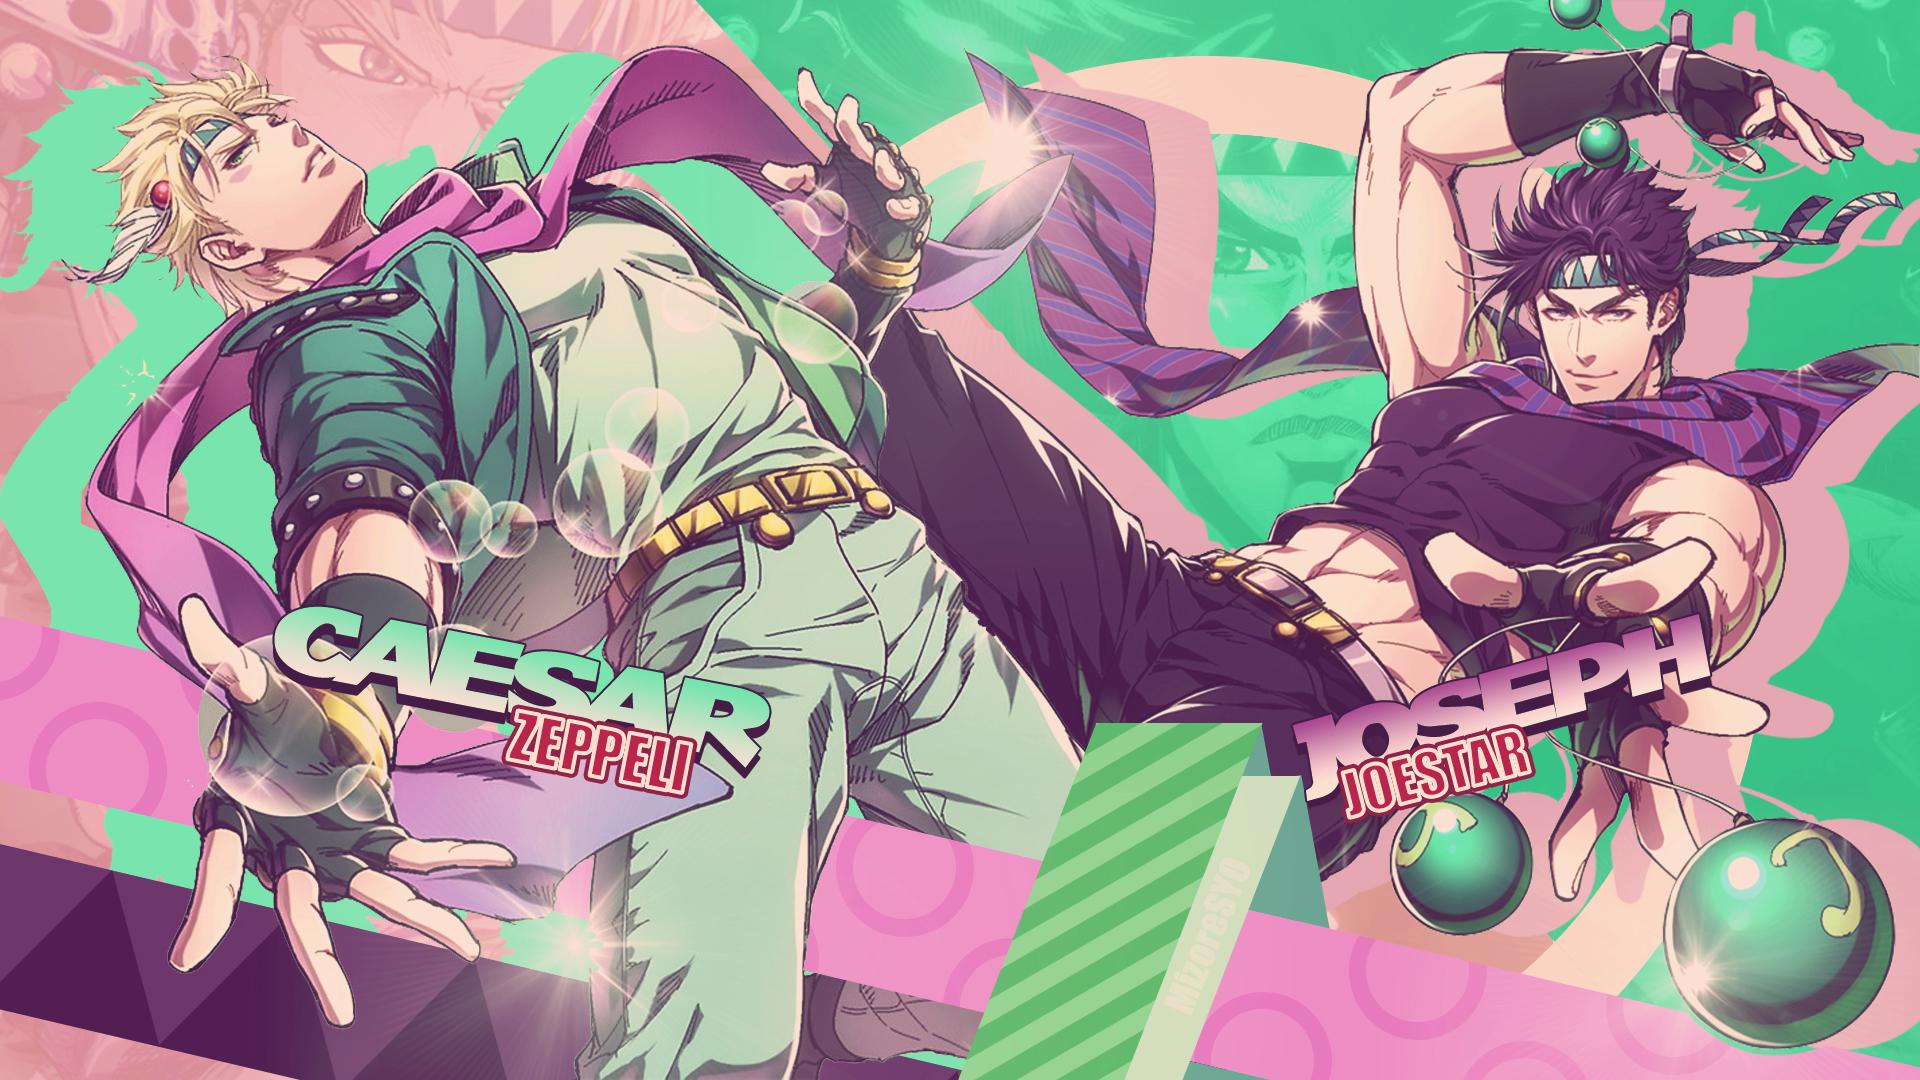 I've done a fair share of wallpaper with the JoJo theme, but this one is my fave. What do you guys think? I'm MizoreSYO :)